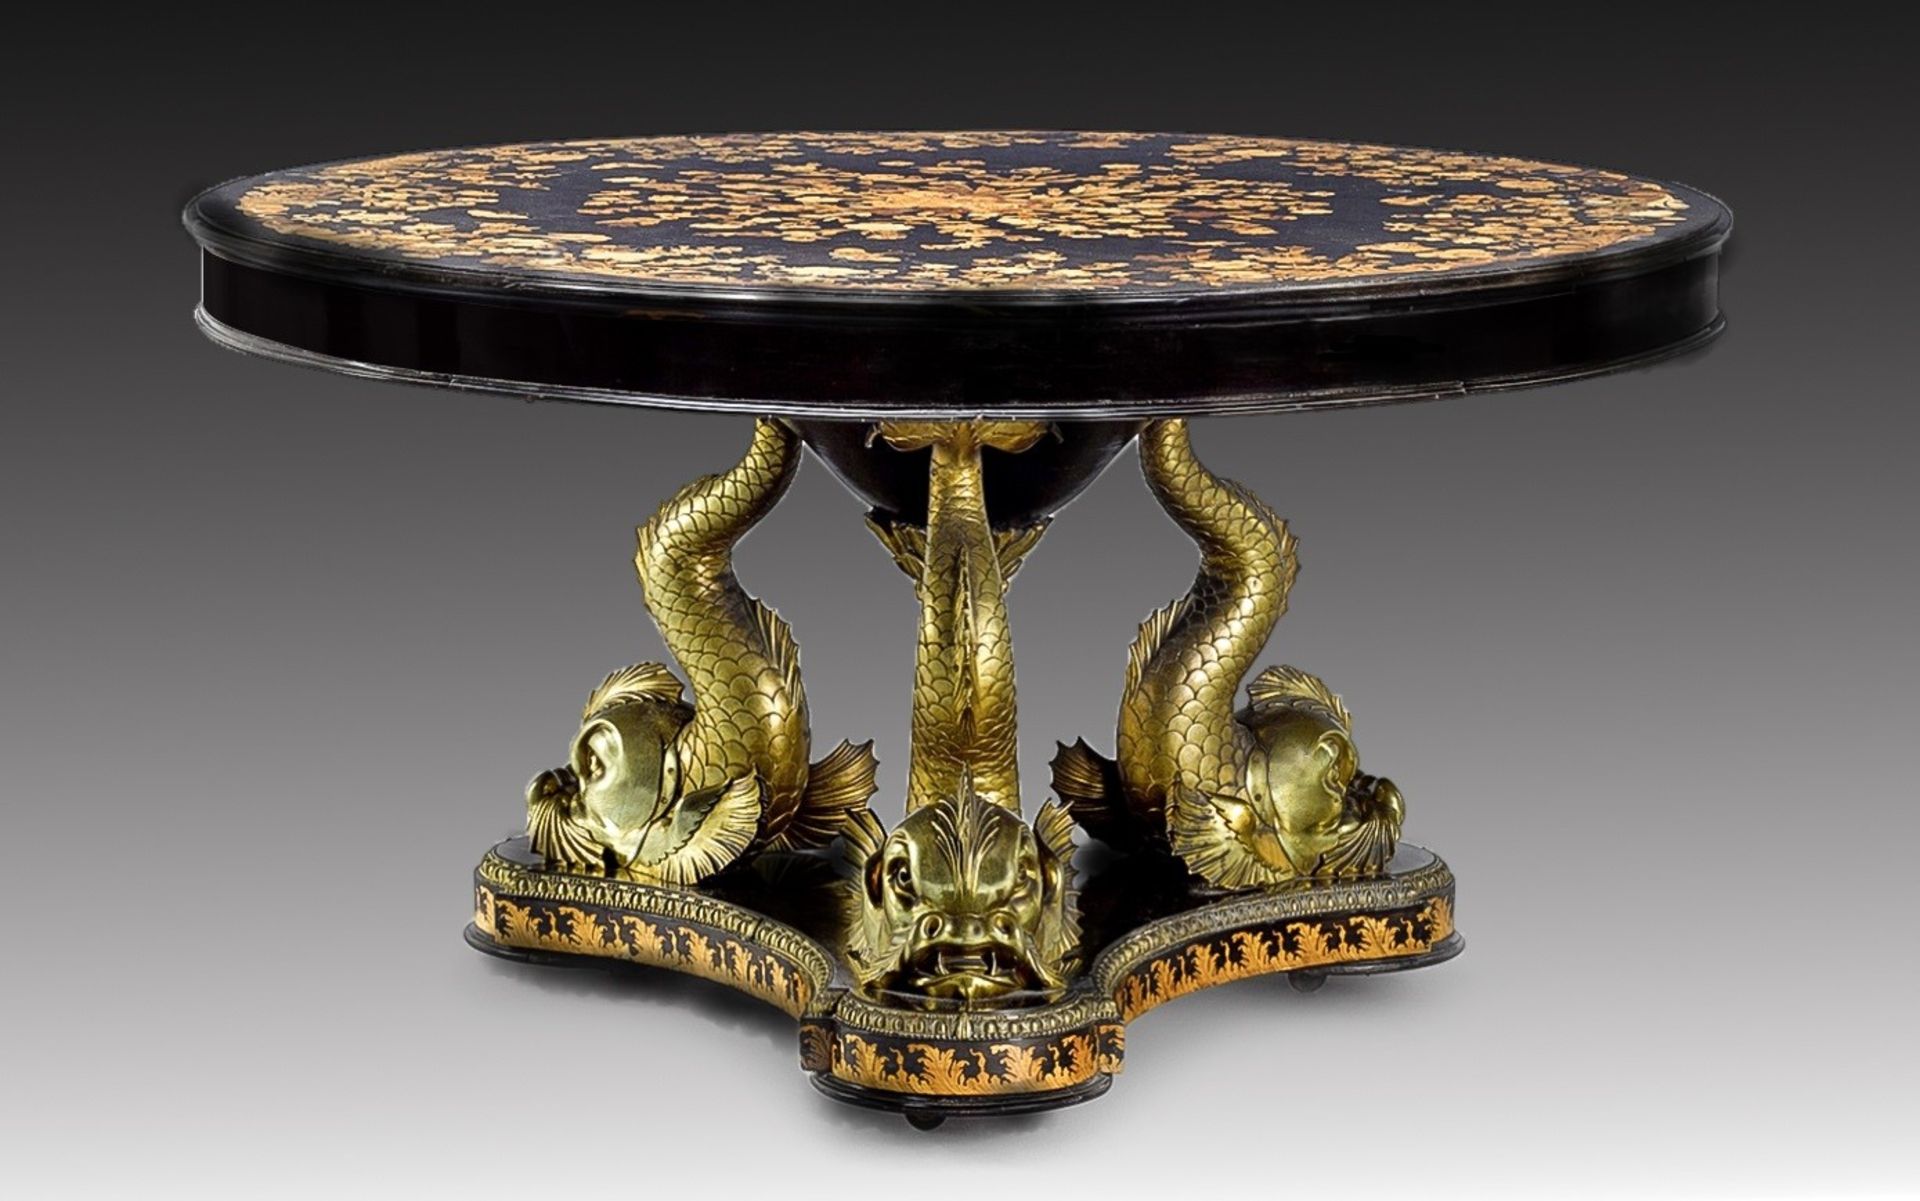 THE ROTHSCHILD MENTMORE EBONY, MARQUETRY AND ORMOLU CENTRE TABLE